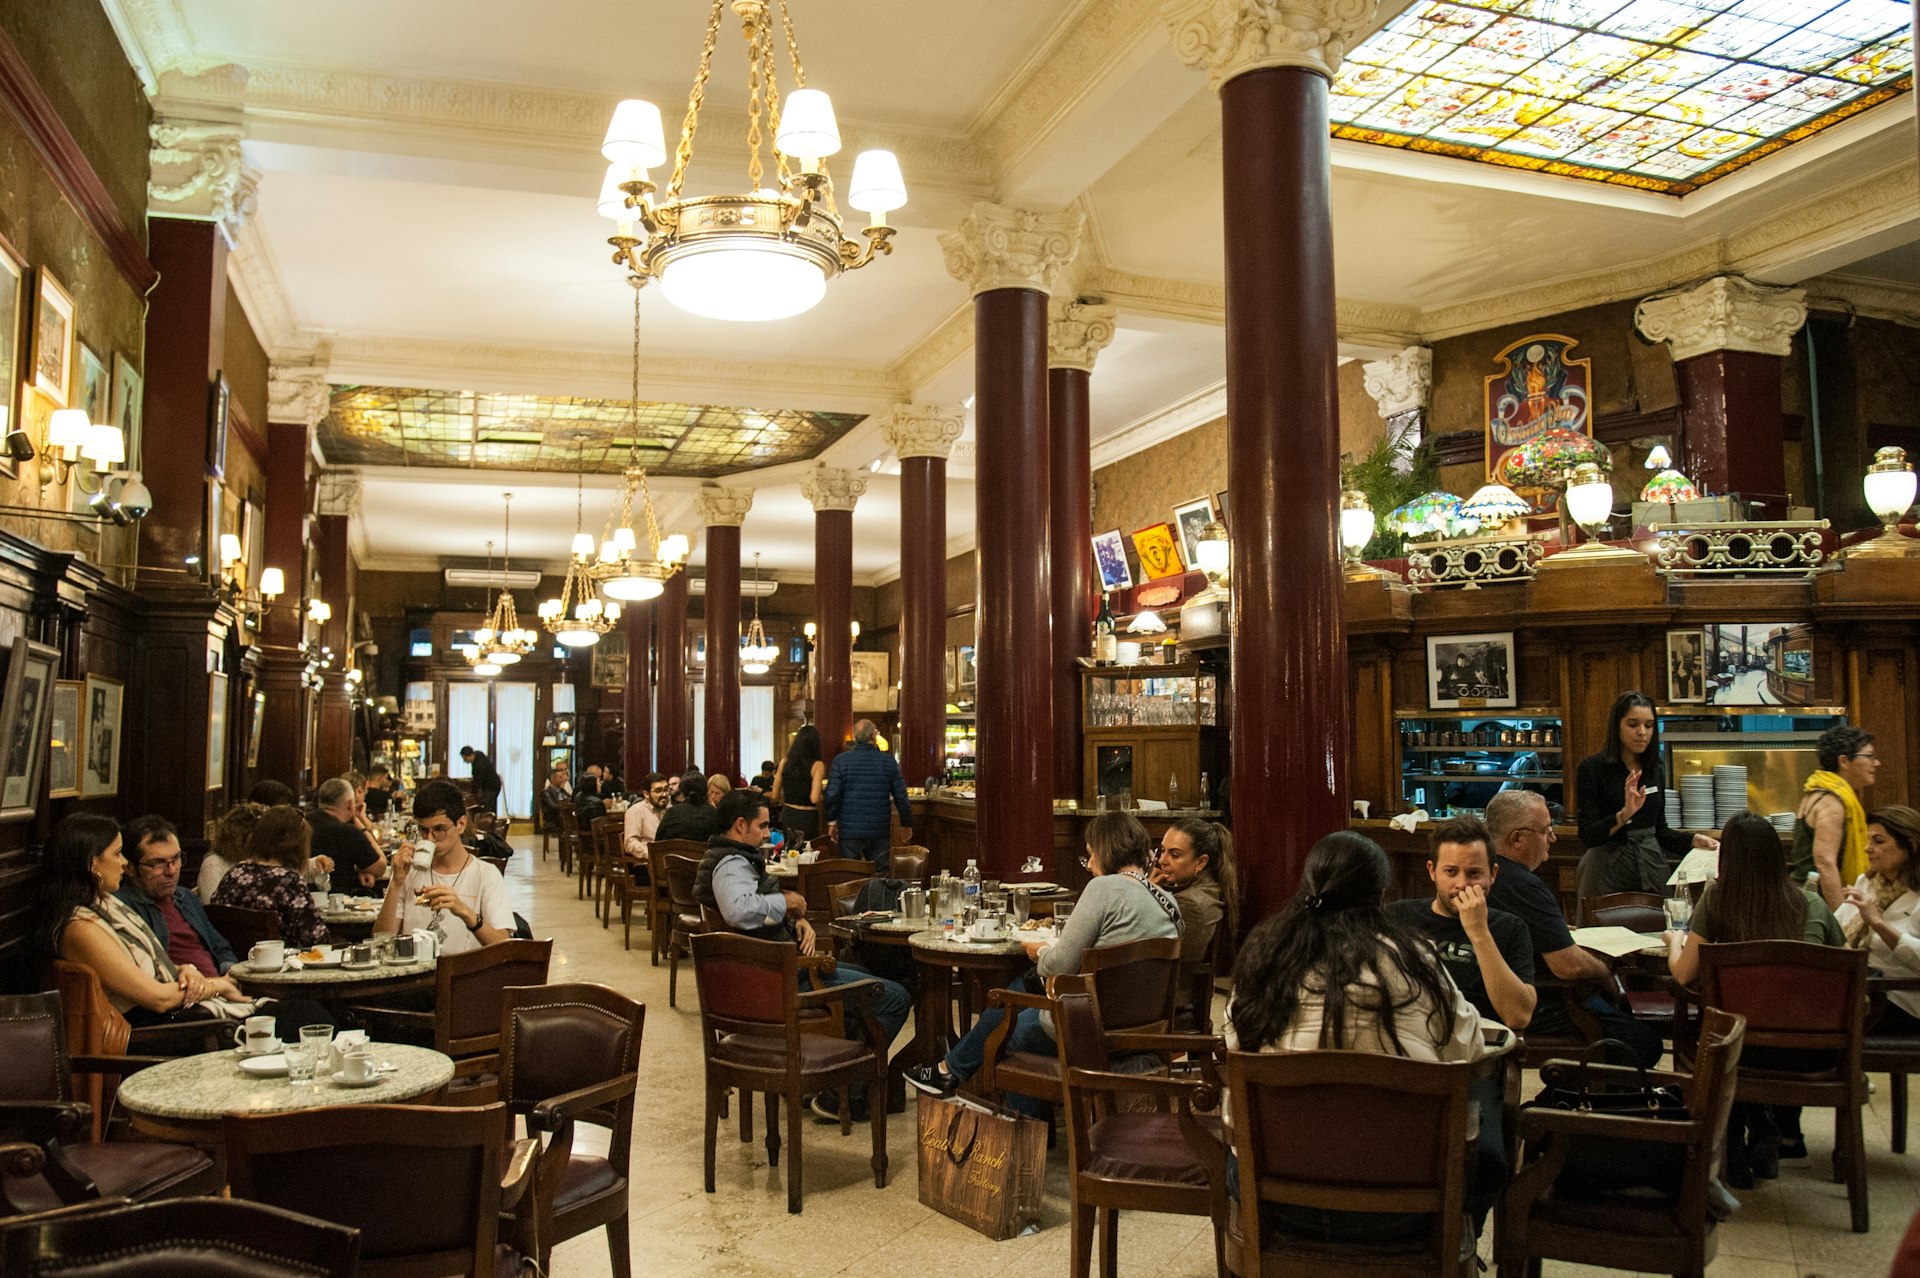 People sit at tables in the ornate interior of Cafe Tortoni, Buenos Aires, Argentina